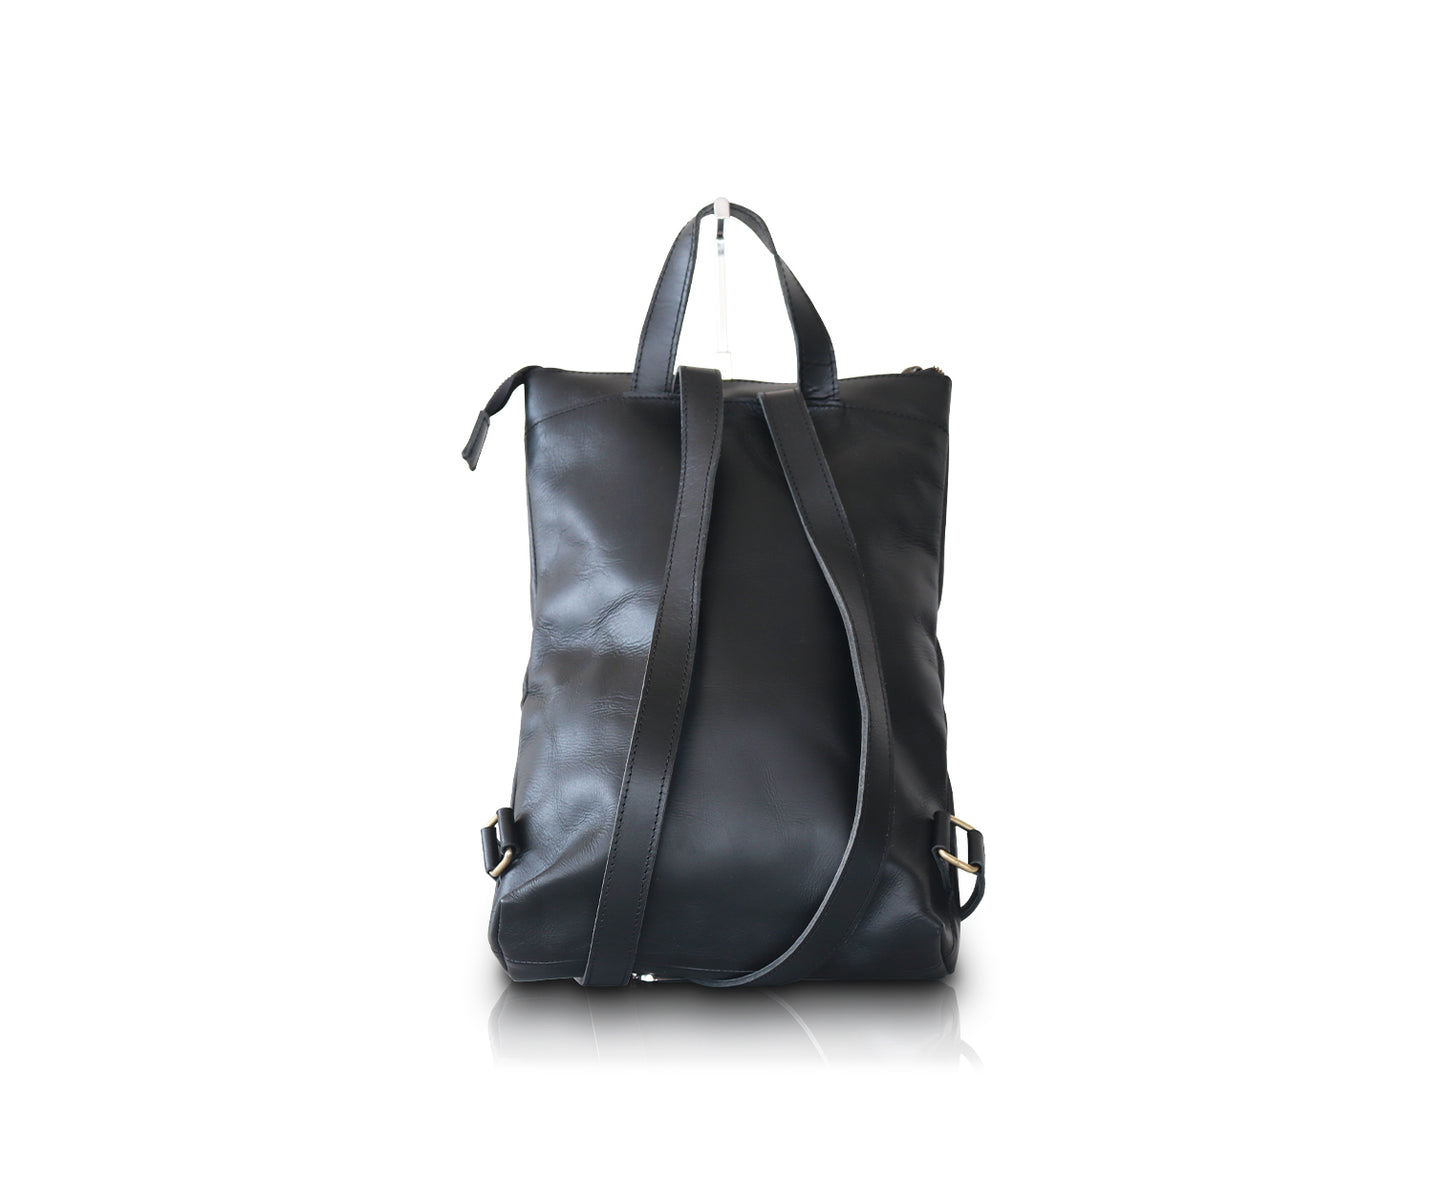 Leather Laptop Backpack - Denali Leather Goods